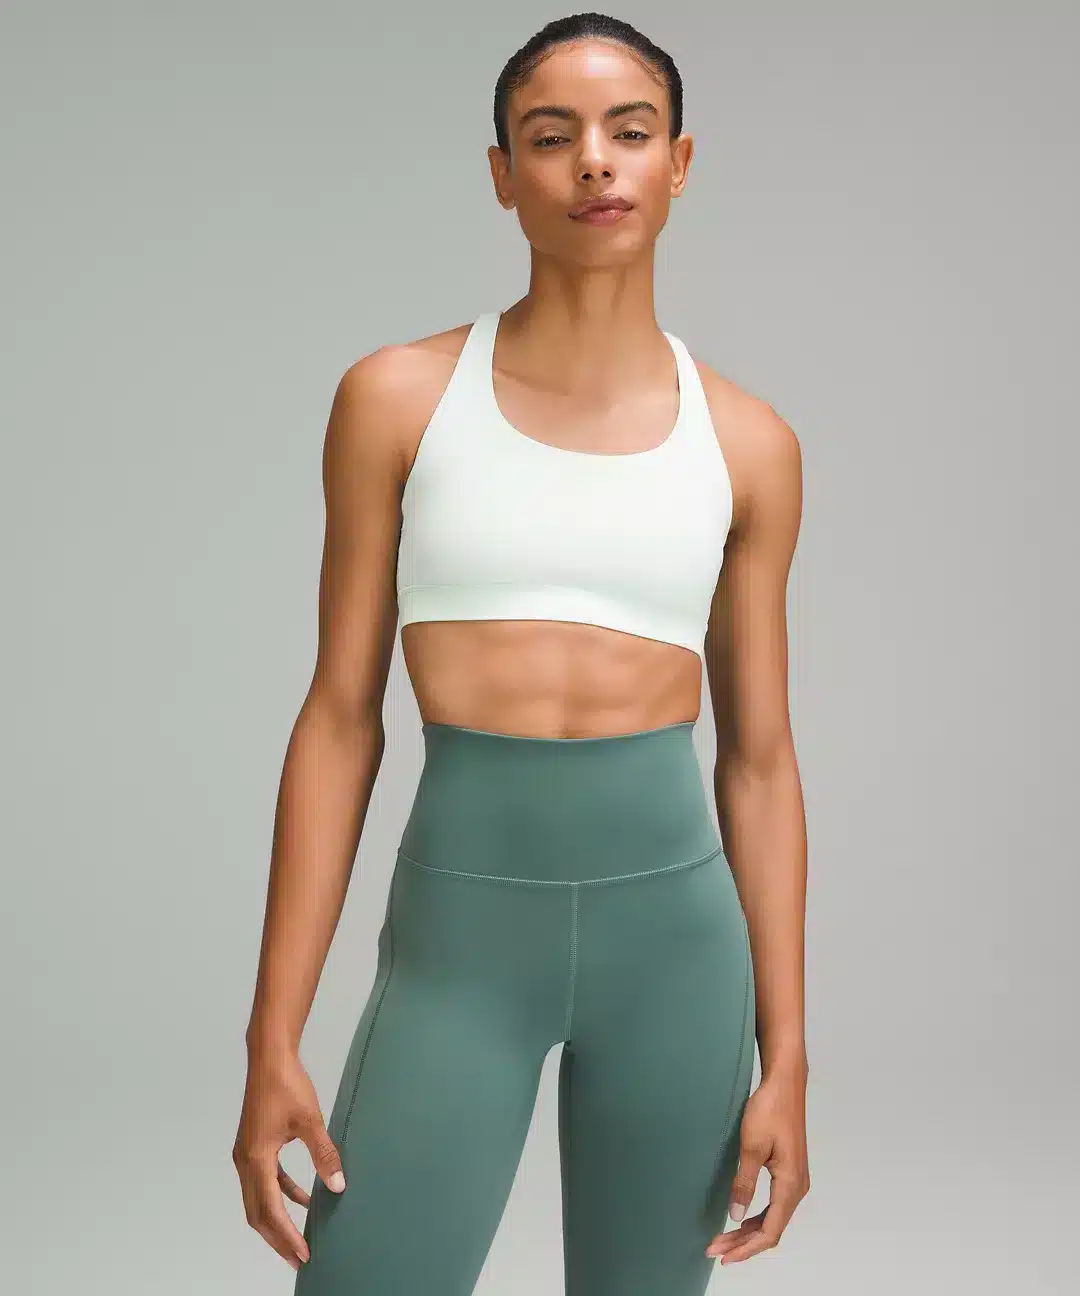 Did Lululemon Increase Prices? A Quick Dive into Lululemon's